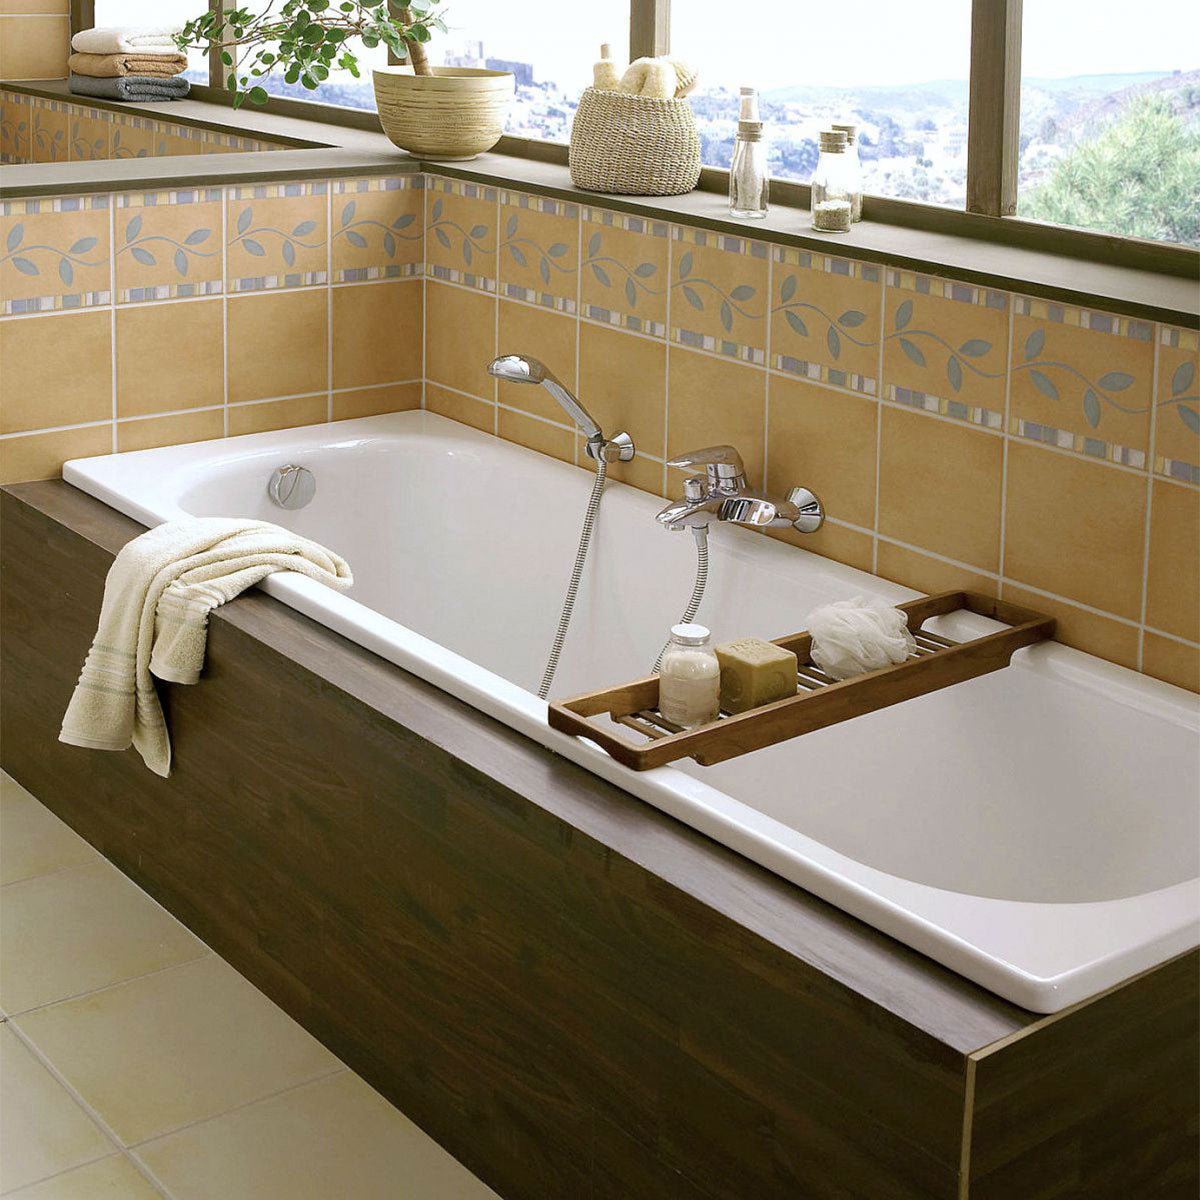 Bette Classic Single Ended Steel Bath Feature Feature